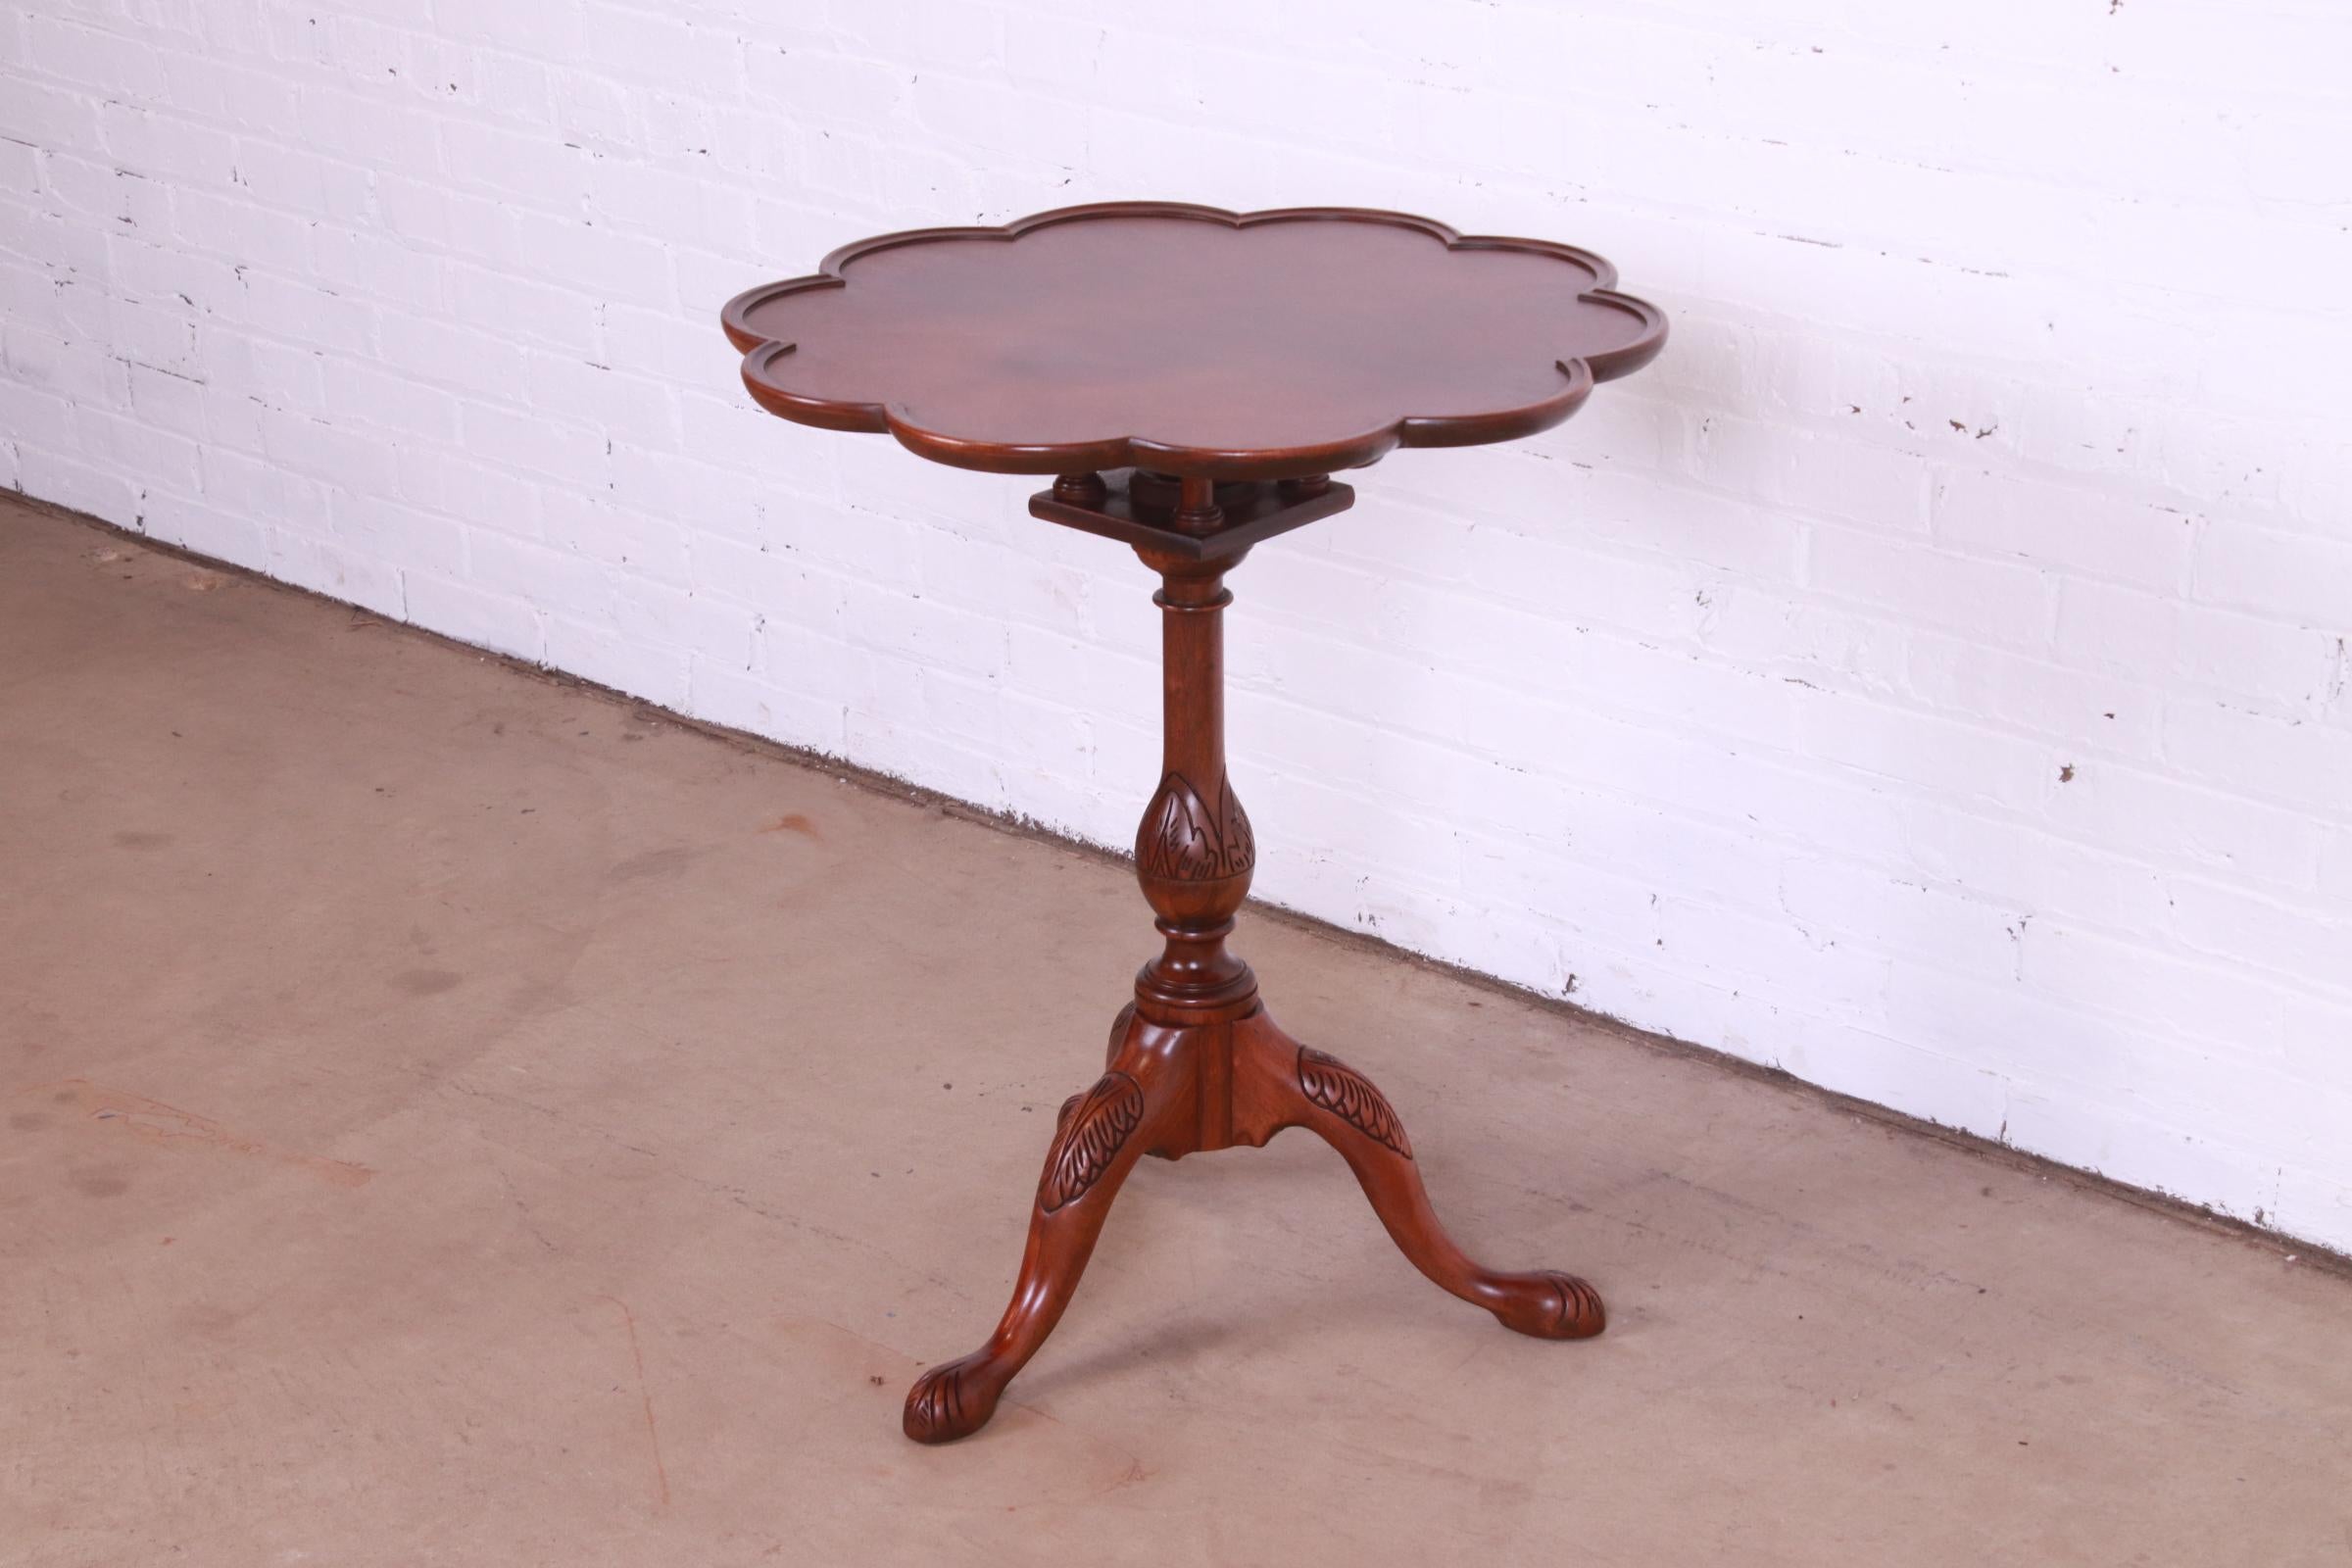 Baker Furniture Georgian Carved Mahogany Tilt Top Pedestal Tea Table In Good Condition For Sale In South Bend, IN